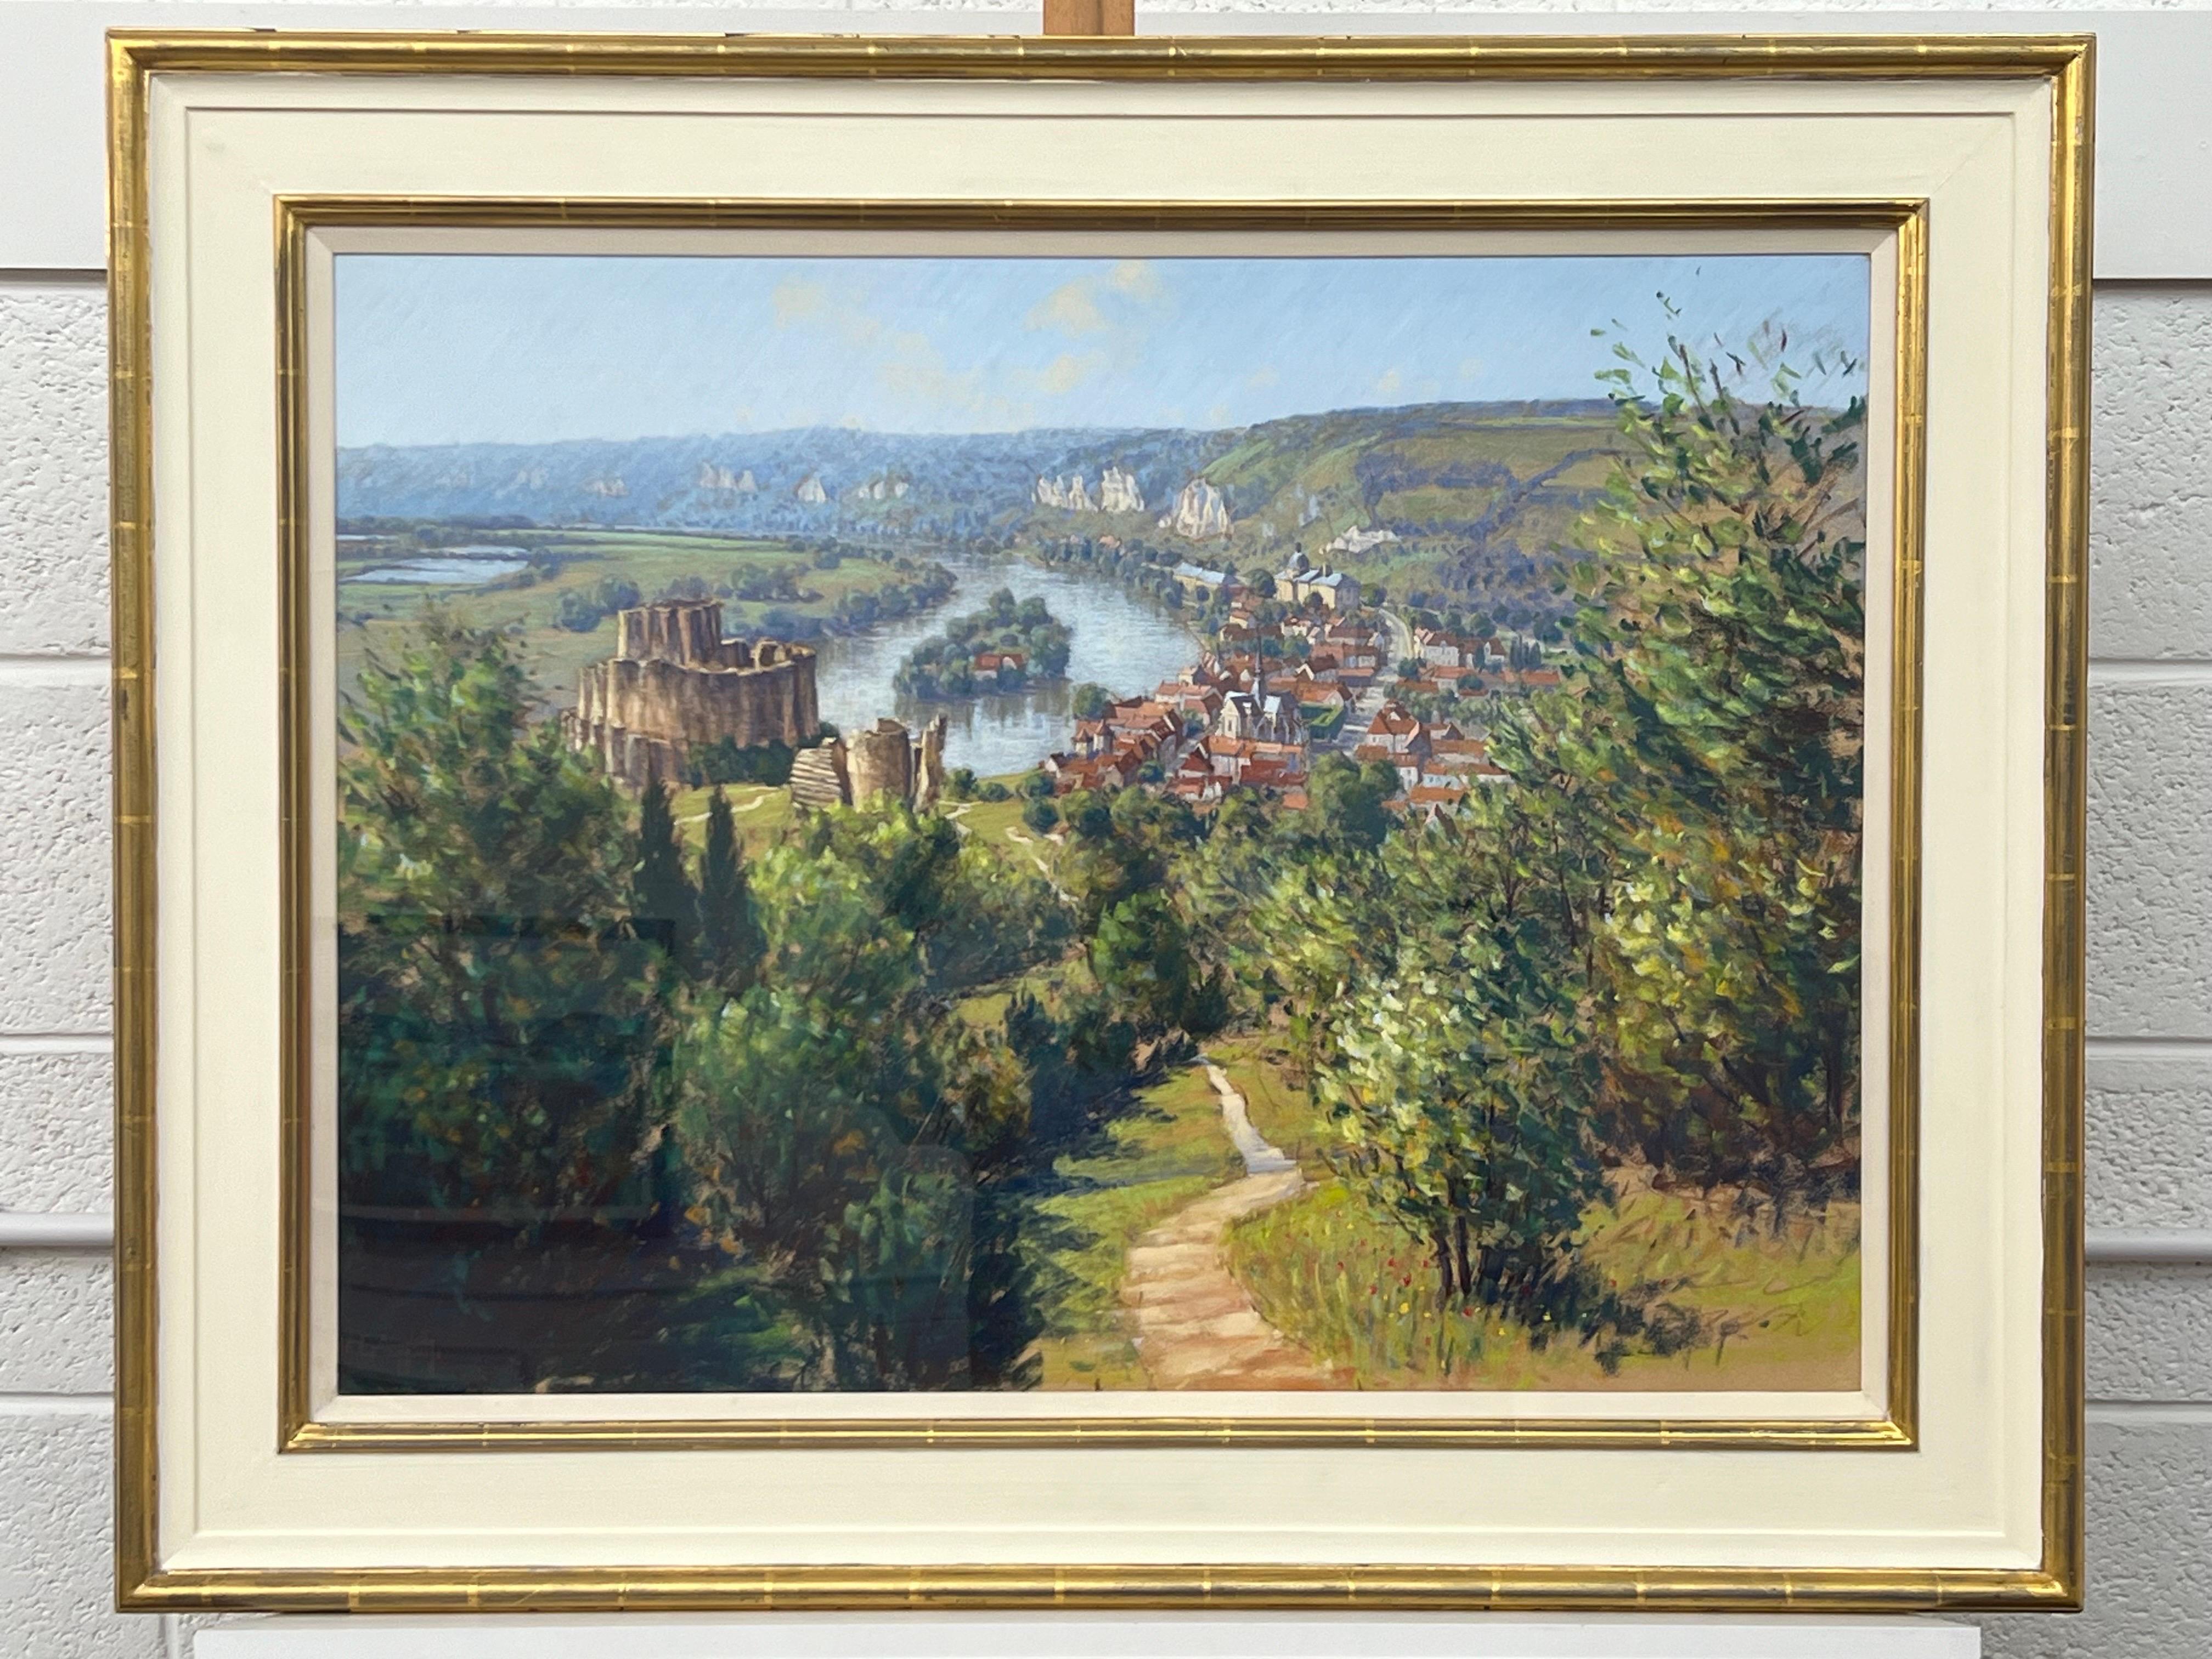 Les Andelys in the Seine Valley France Landscape Pastel Art. A fine example of the beautiful work of British 20th Century Artist, Lionel Aggett (1938-2009). Signed front and rear, framed behind an acrylic sheet, presented in a high quality gold and